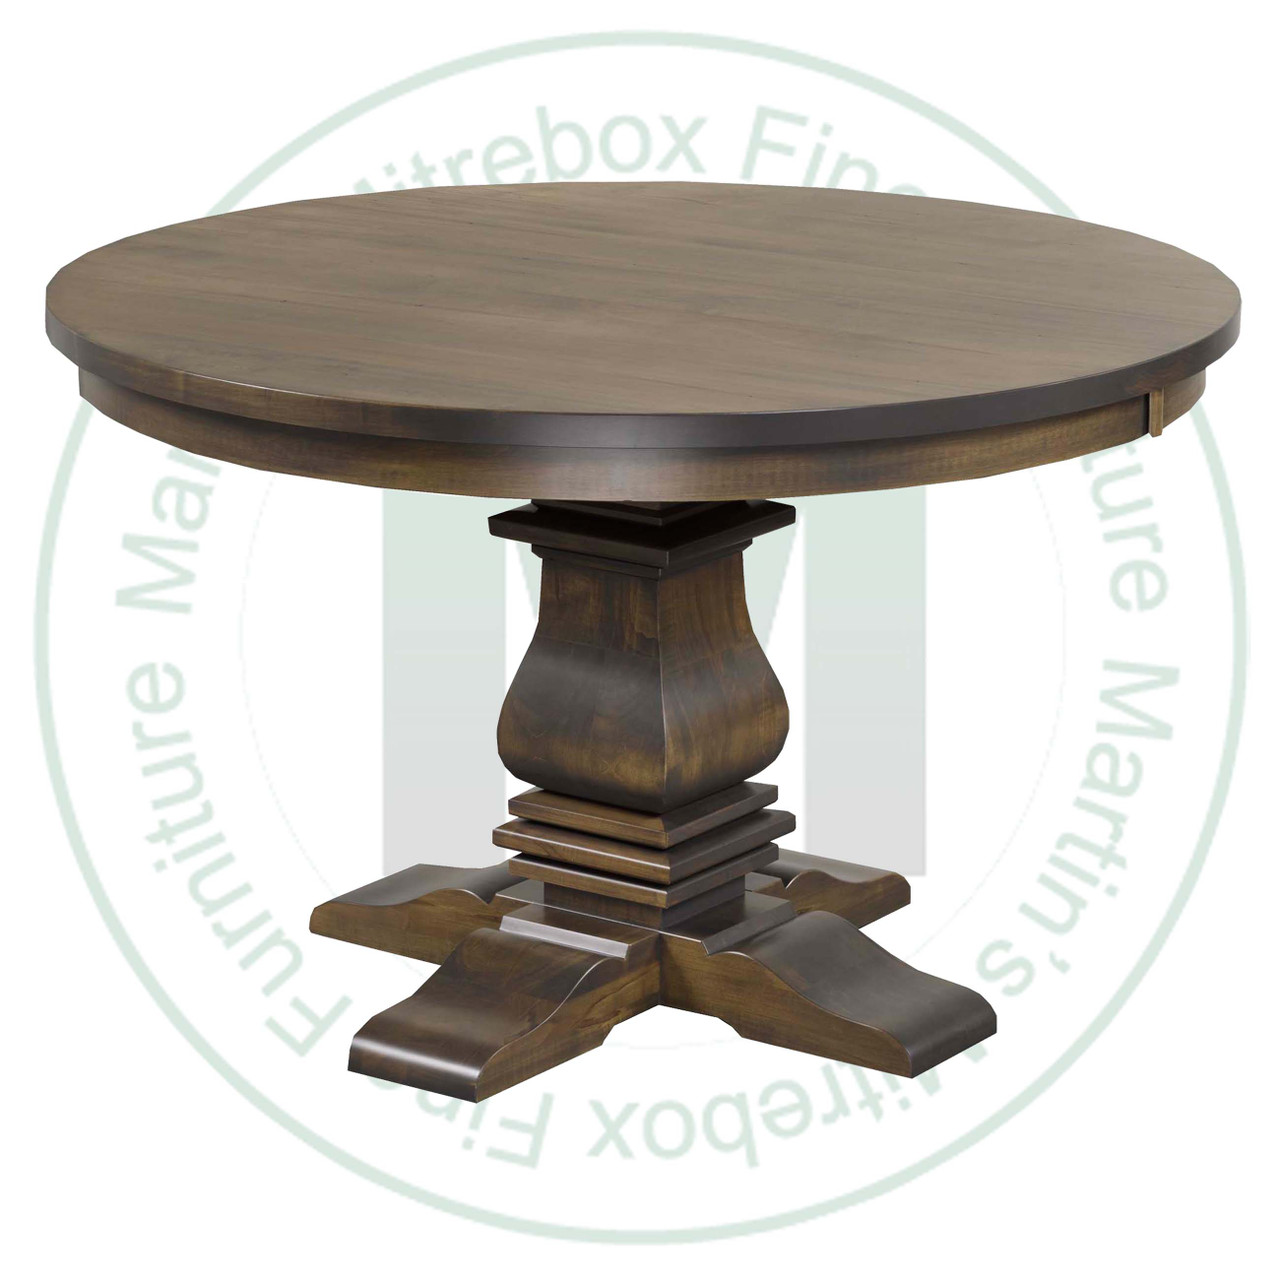 Oak Spartan Collection Single Pedestal Table 42''D x 48''W x 30''H With 2 - 12'' Leaves. Table Has 1'' Thick Top